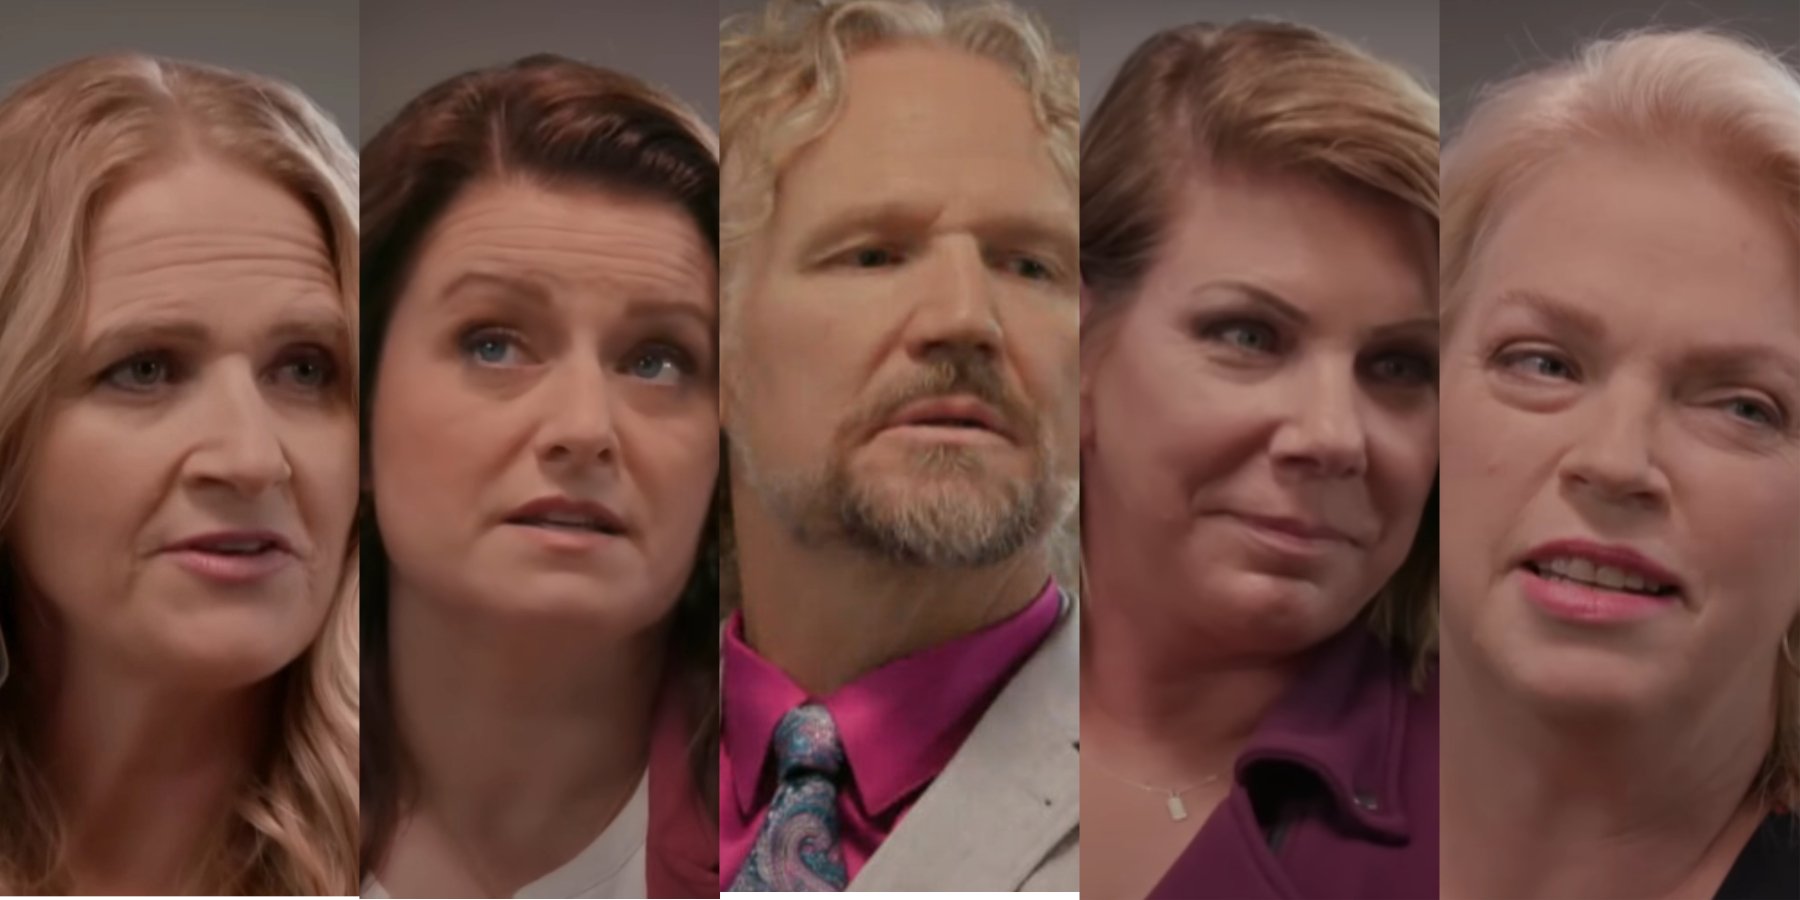 Christine, Robyn, Kody, Meri, and Janelle Brown in separate screenshots from the season 17 episodes of the 'Sister Wives' tell-all.